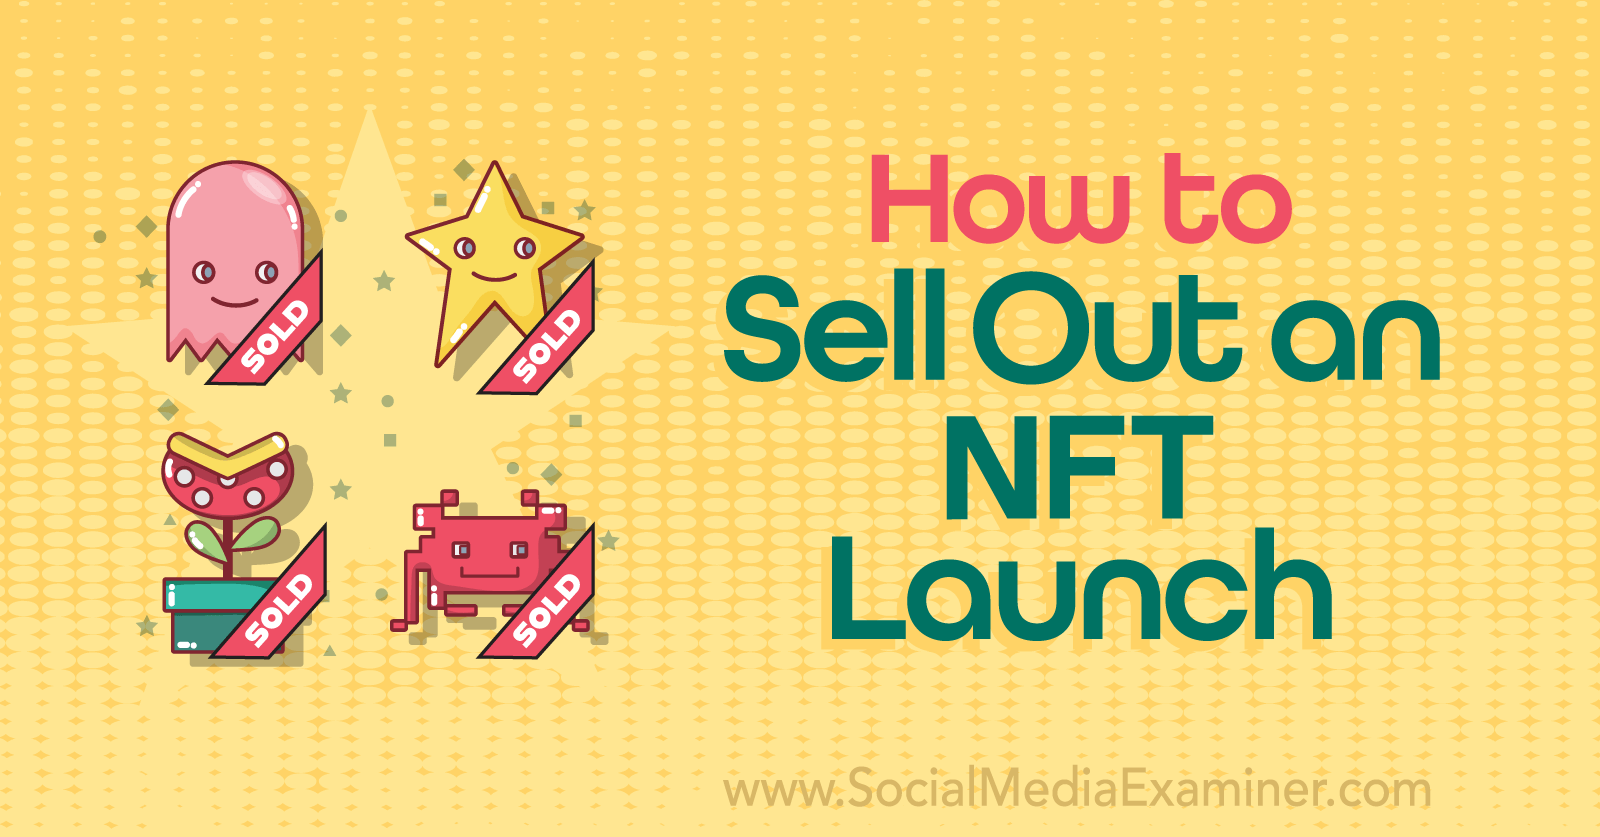 How to Sell Out an NFT Launch-Social Media Examiner